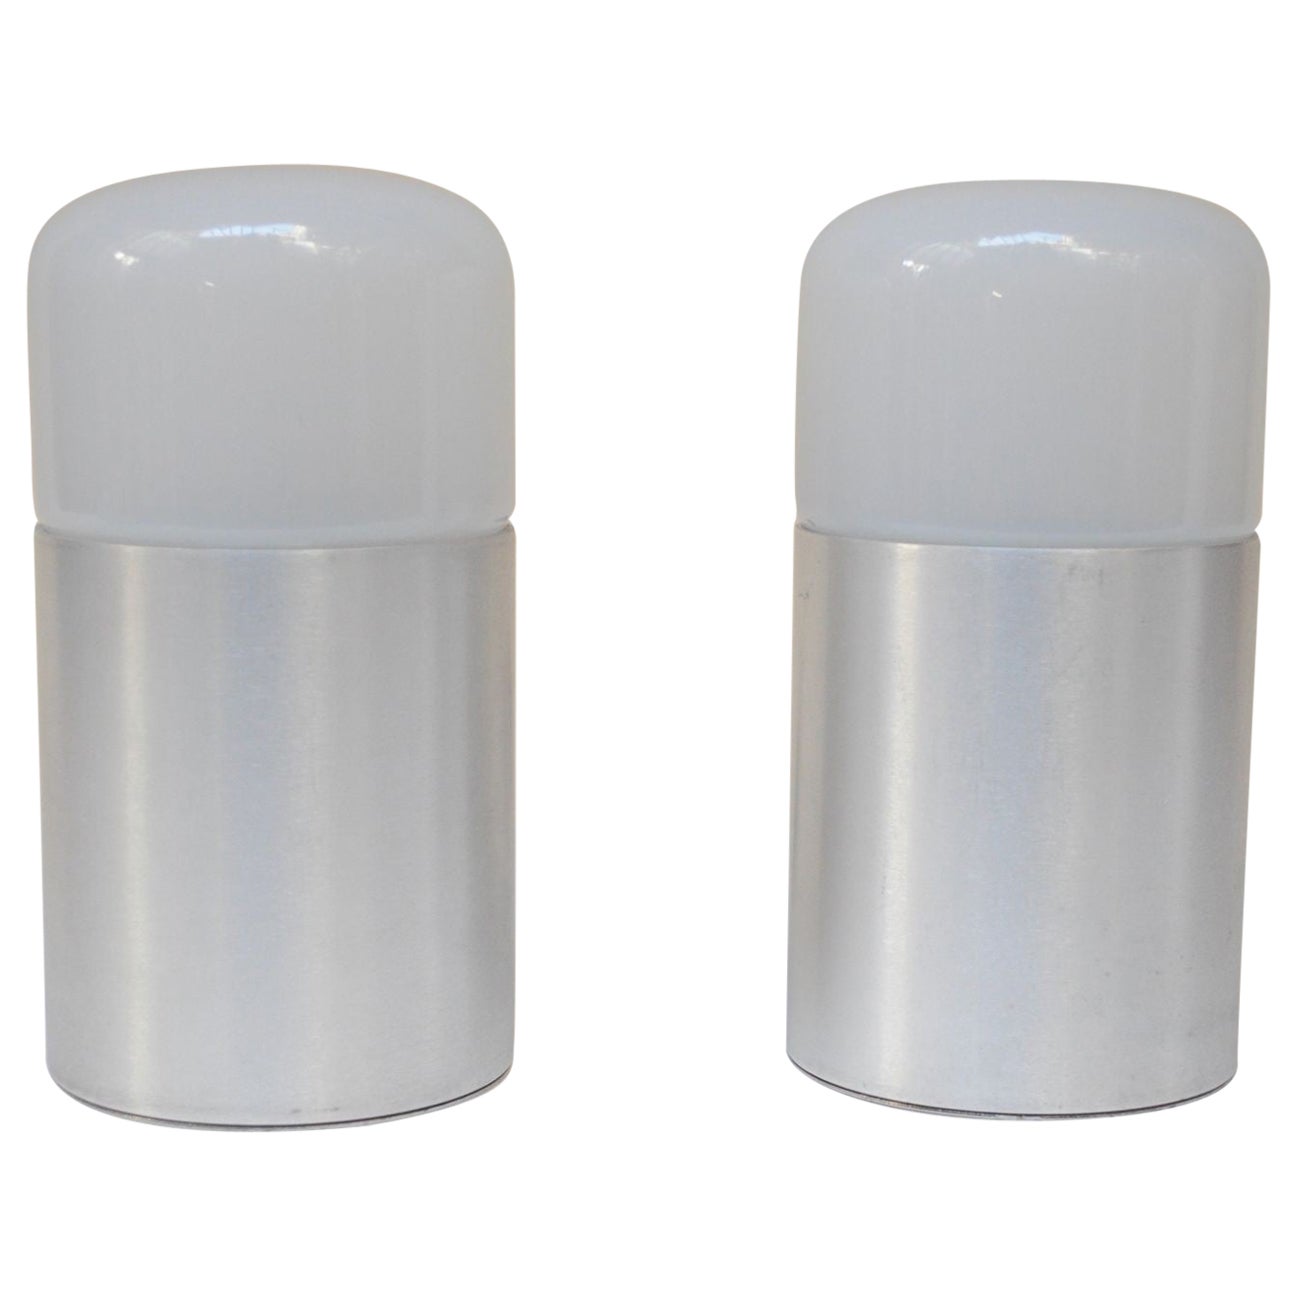 Pair of Italian Modern Bedside/Table Lamps in Opaline Glass and Brushed Aluminum